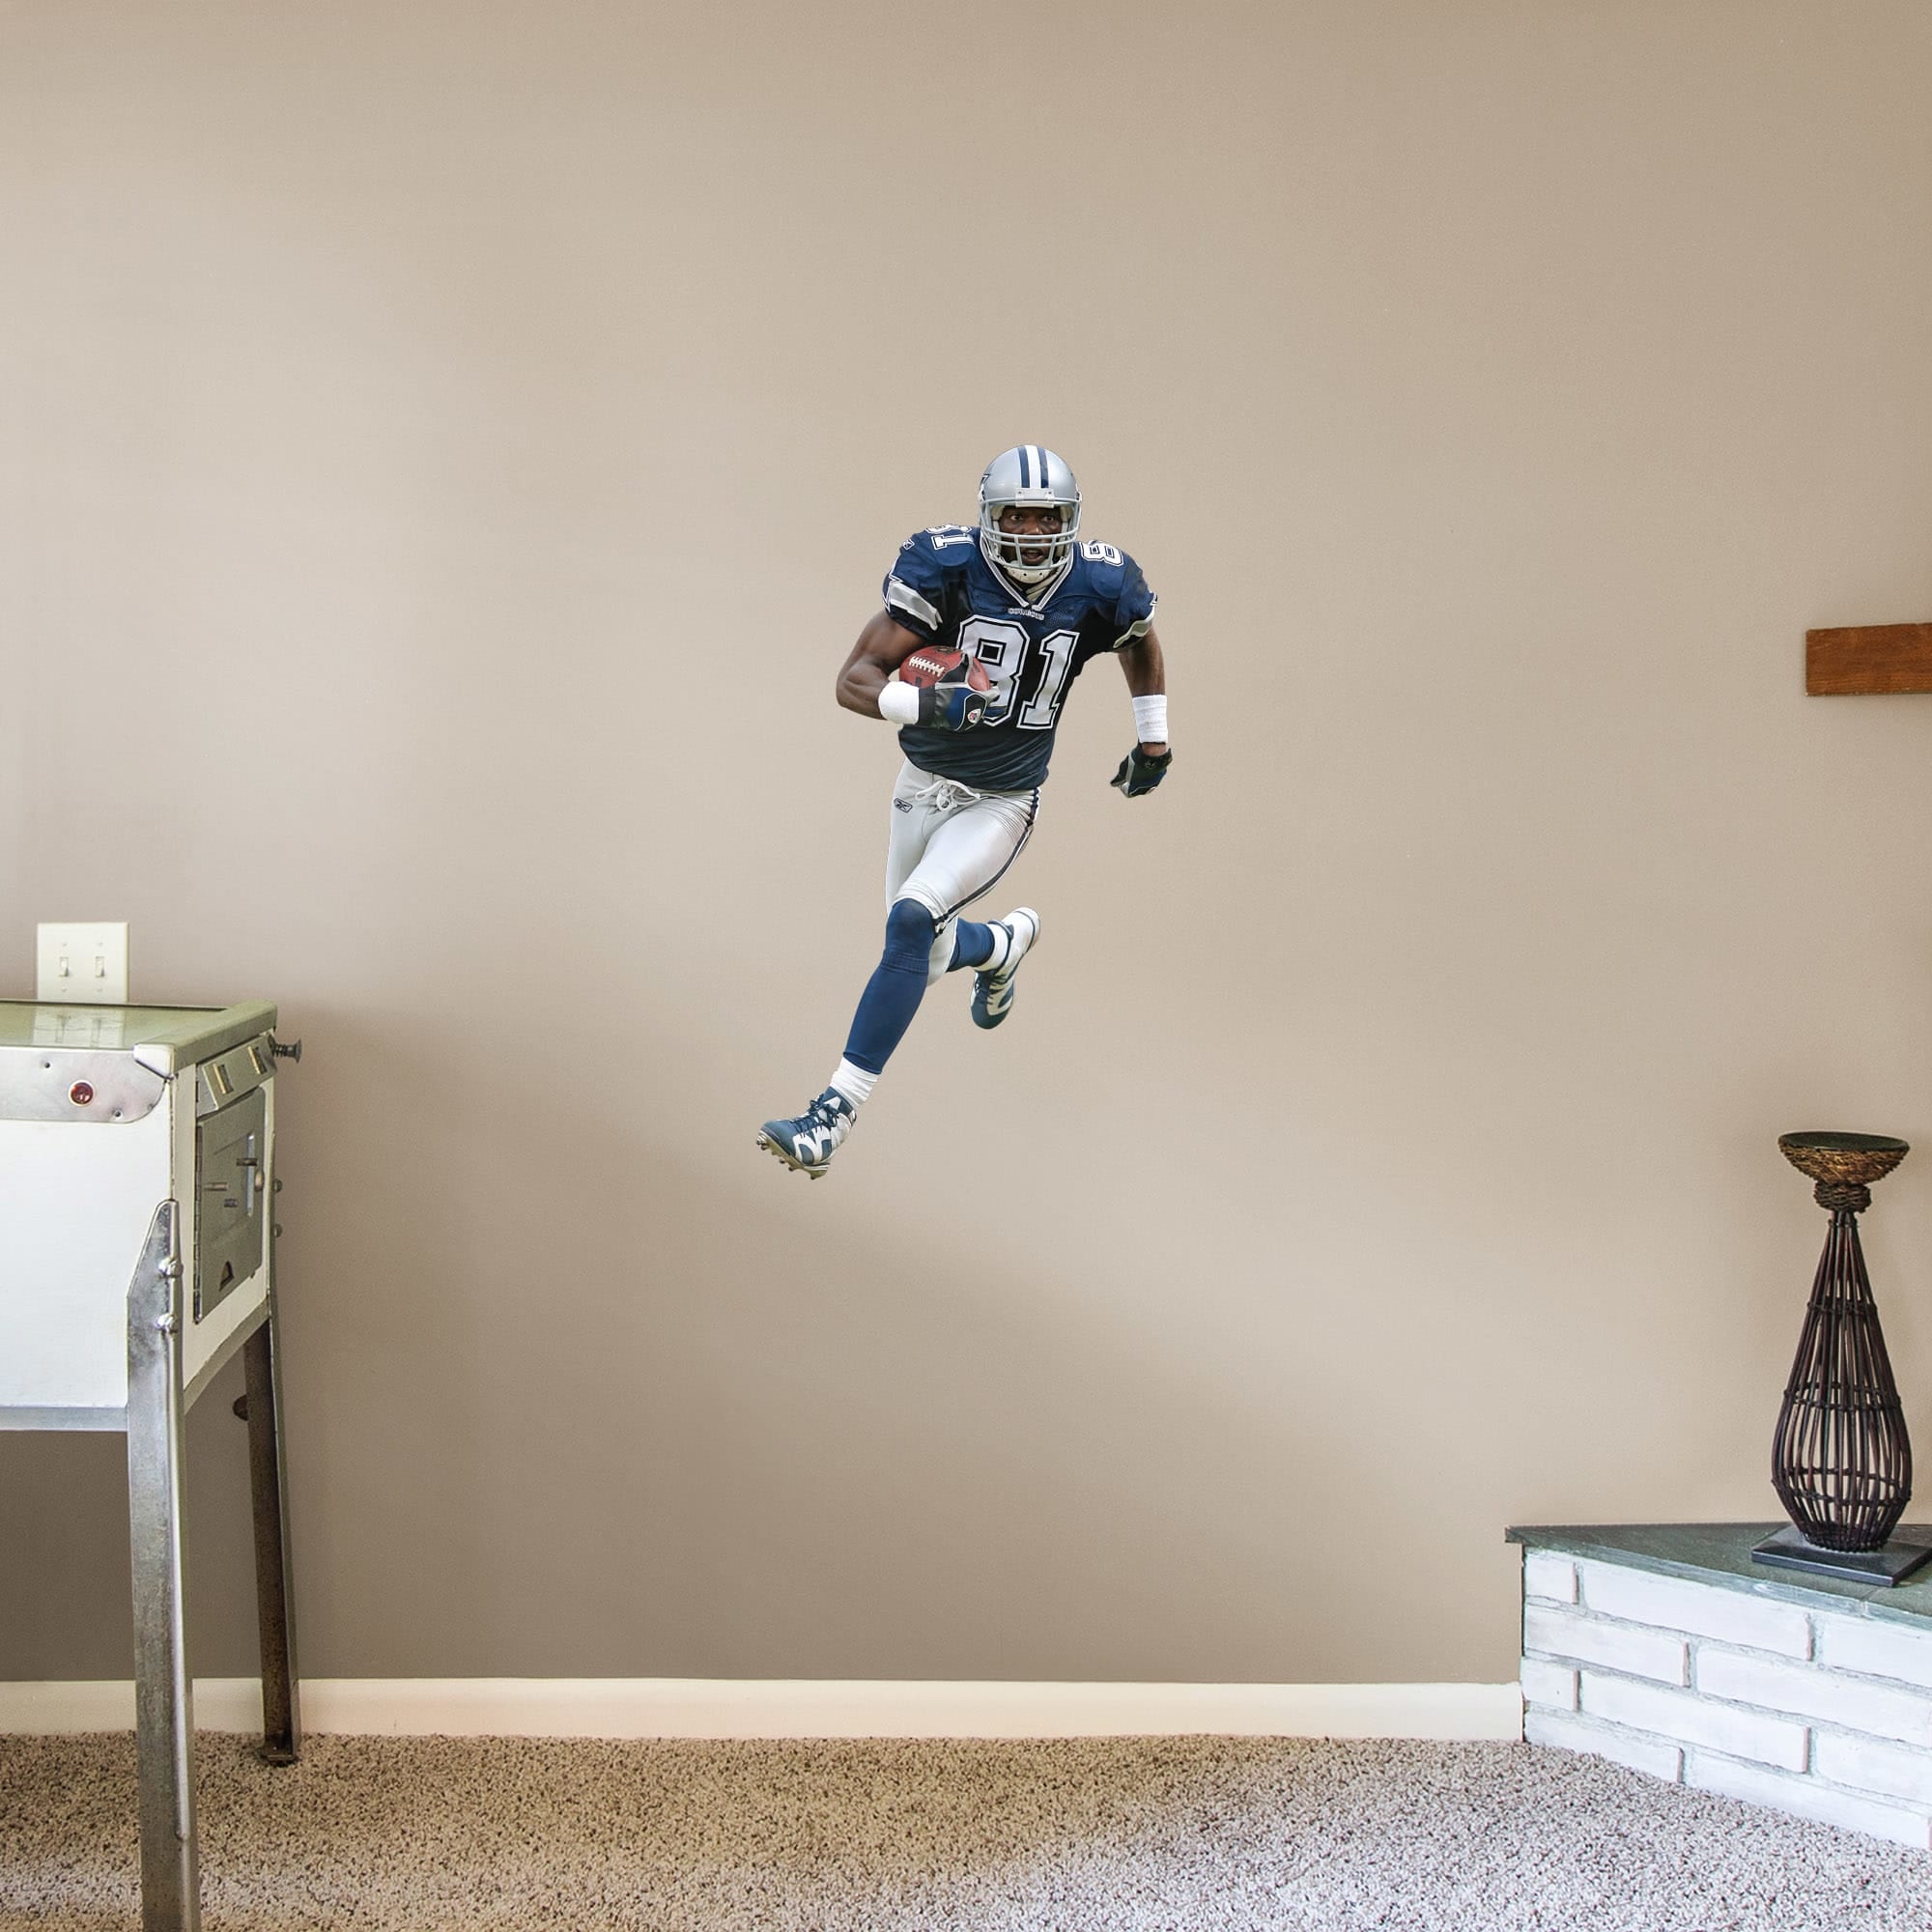 Terrell Owens for Dallas Cowboys: Legend - Officially Licensed NFL Removable Wall Decal XL by Fathead | Metal/Vinyl